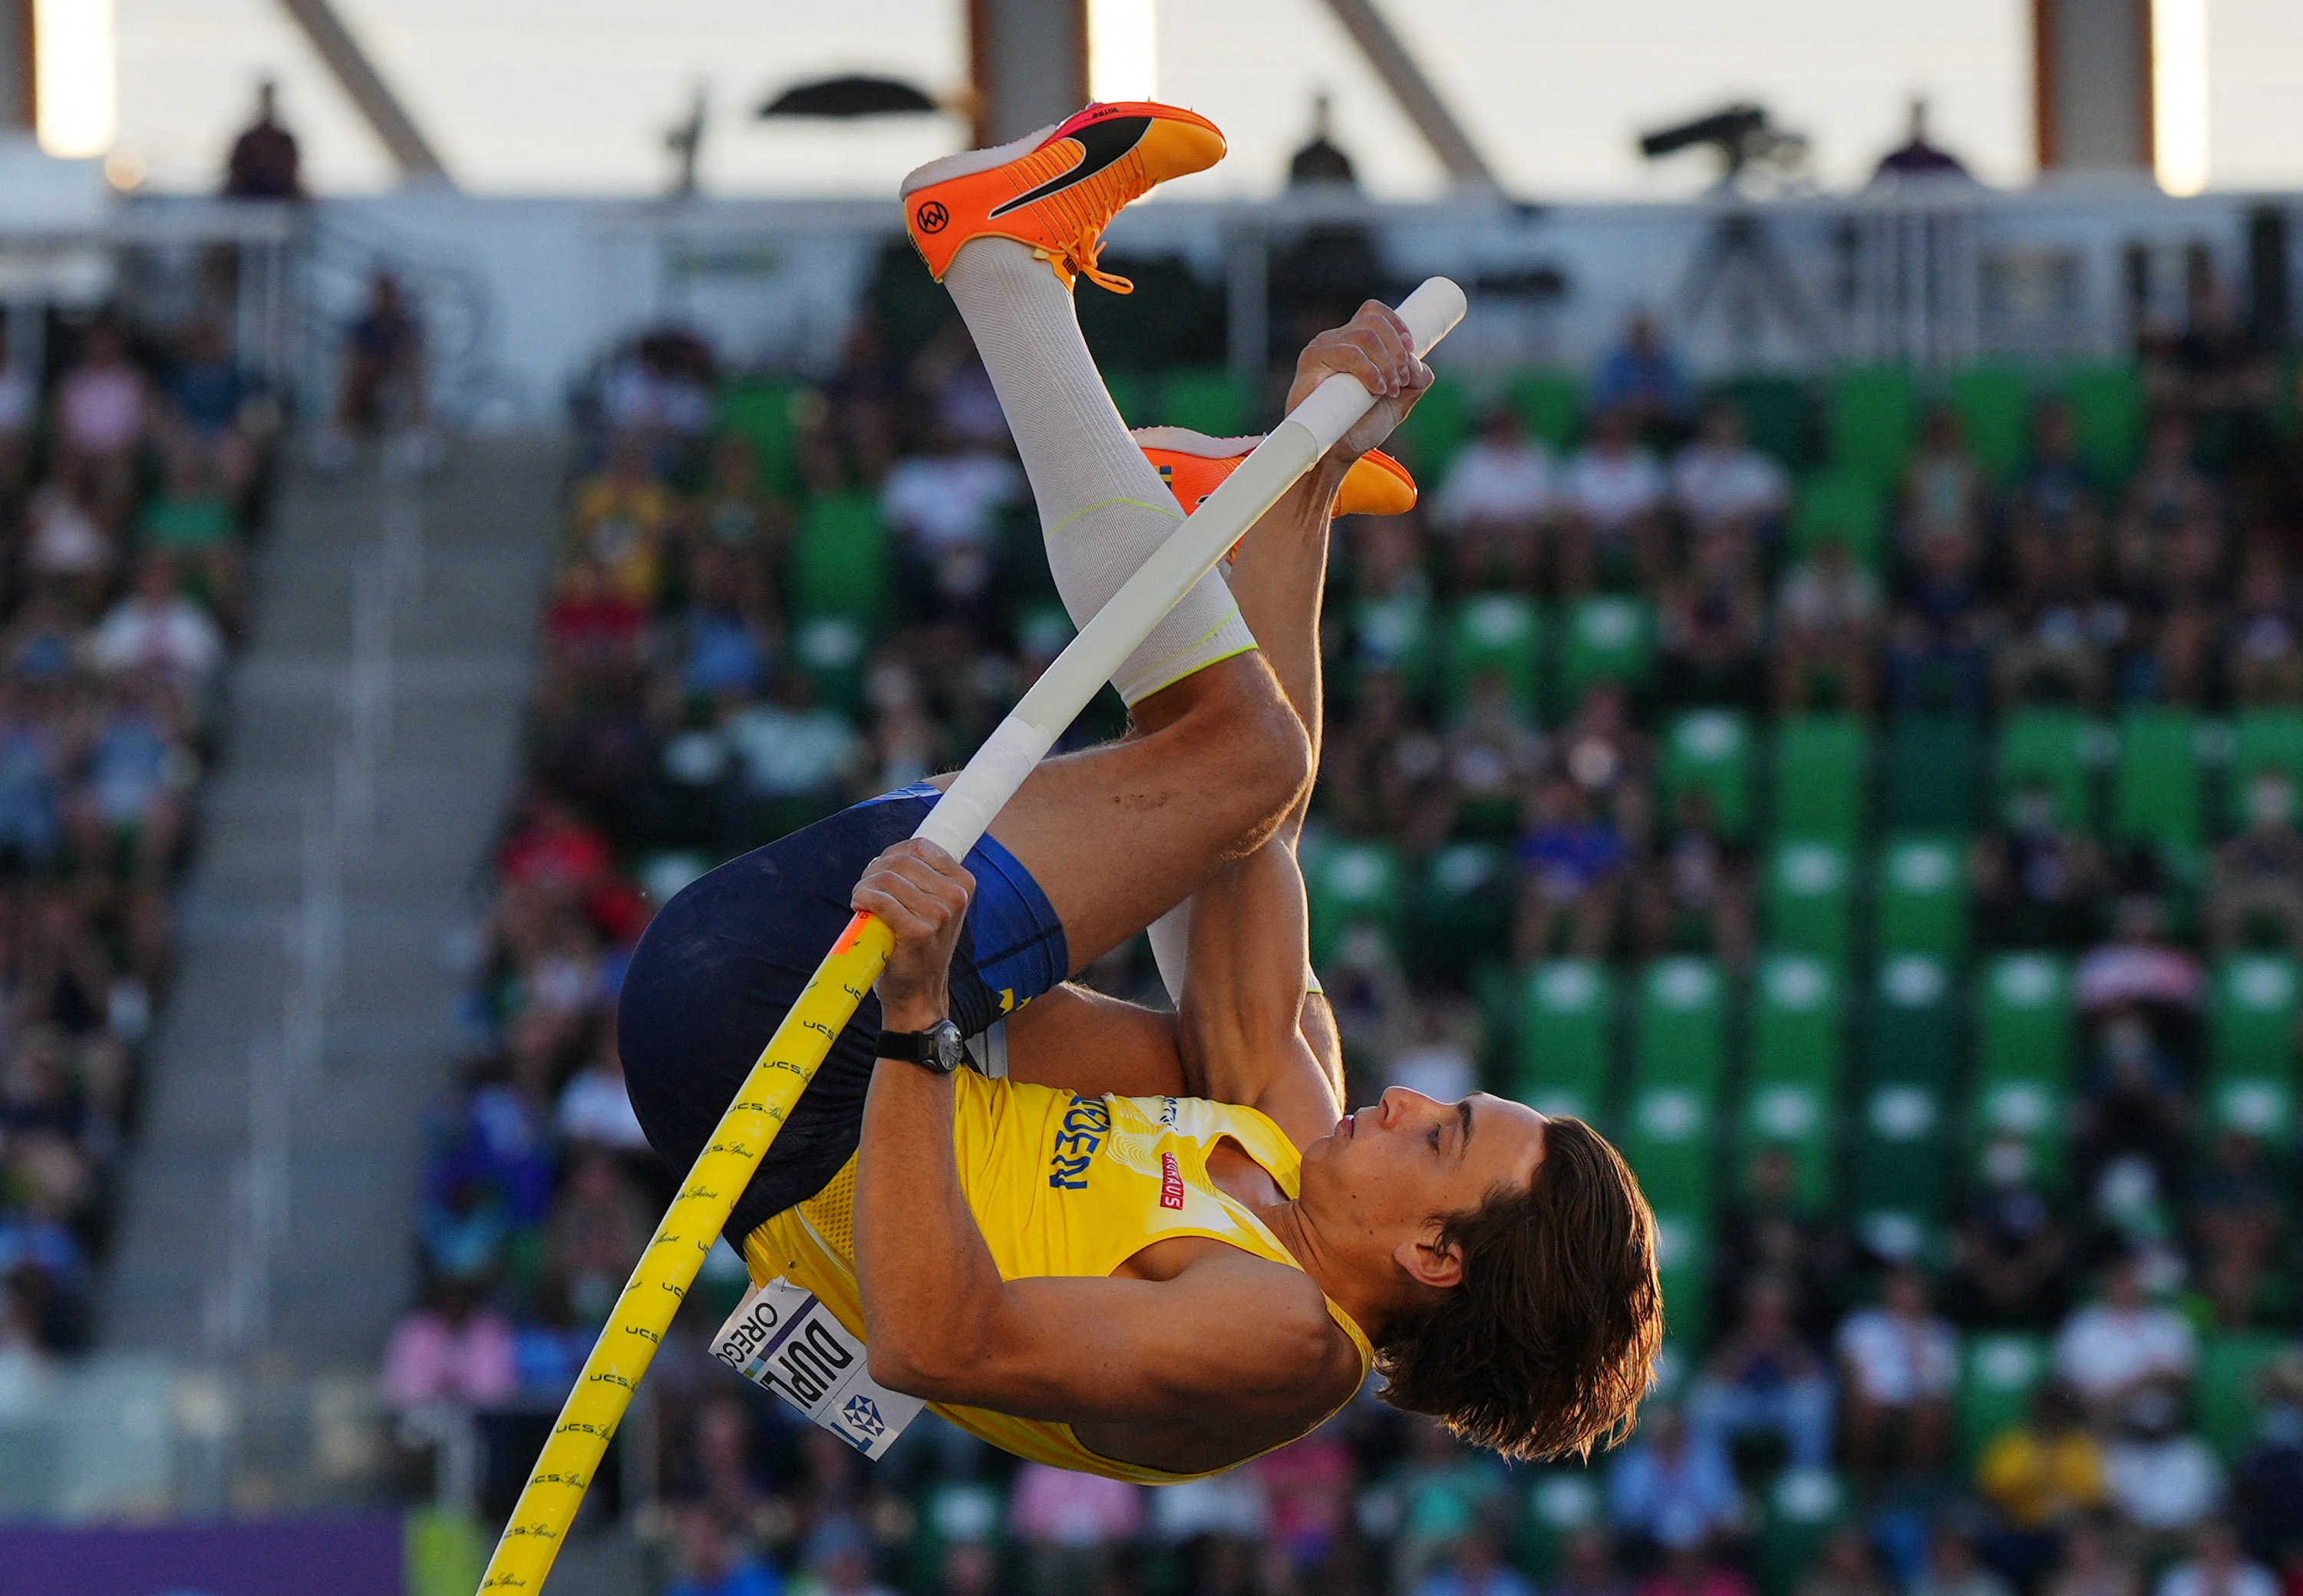 Swede Duplantis breaks pole vault world record to win gold Reuters